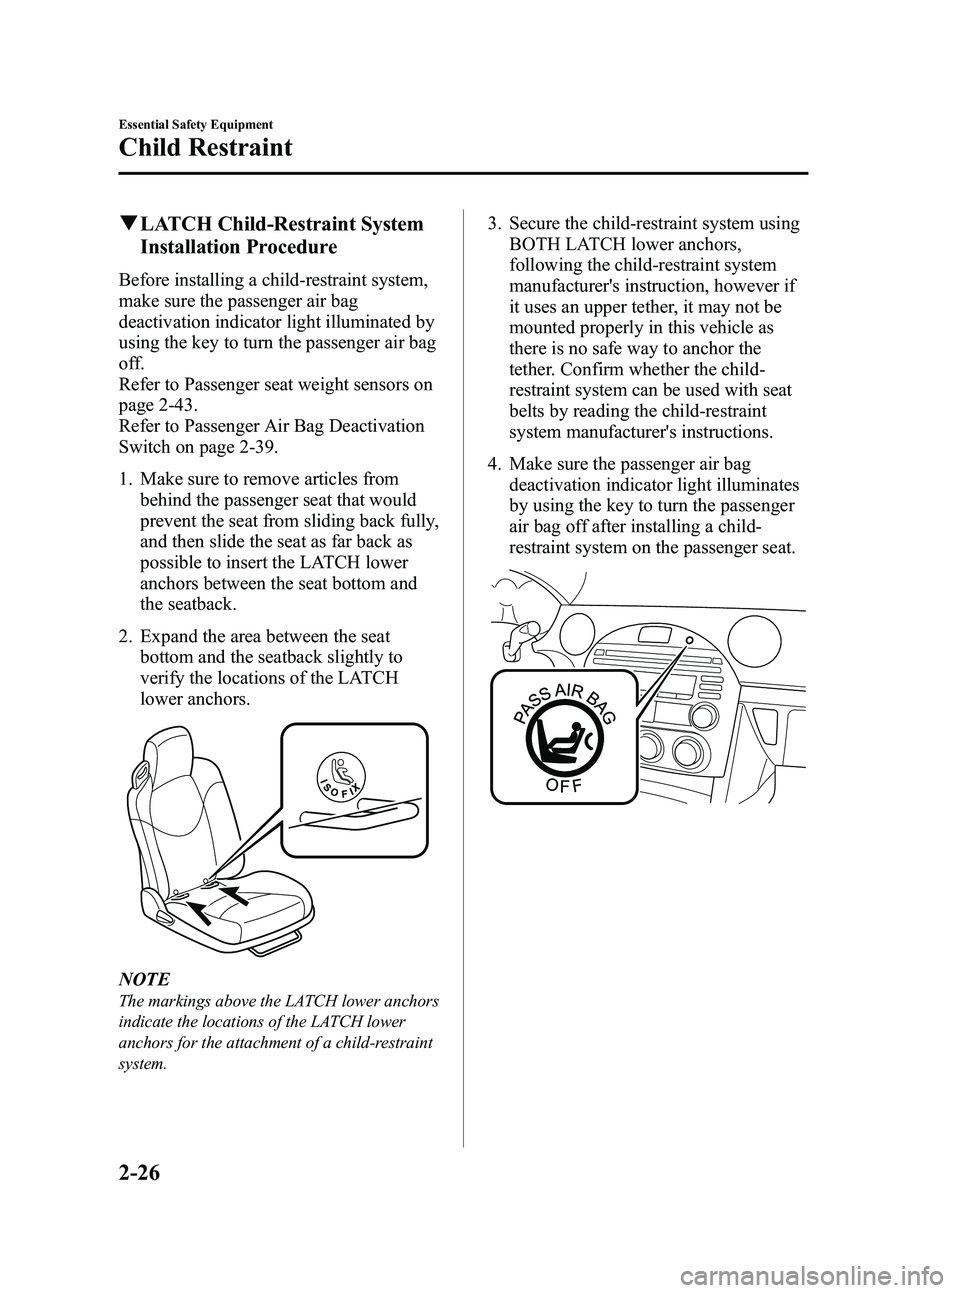 MAZDA MODEL MX-5 MIATA POWER RETRACTABLE HARDTOP 2009  Owners Manual Black plate (38,1)
qLATCH Child-Restraint System
Installation Procedure
Before installing a child-restraint system,
make sure the passenger air bag
deactivation indicator light illuminated by
using th